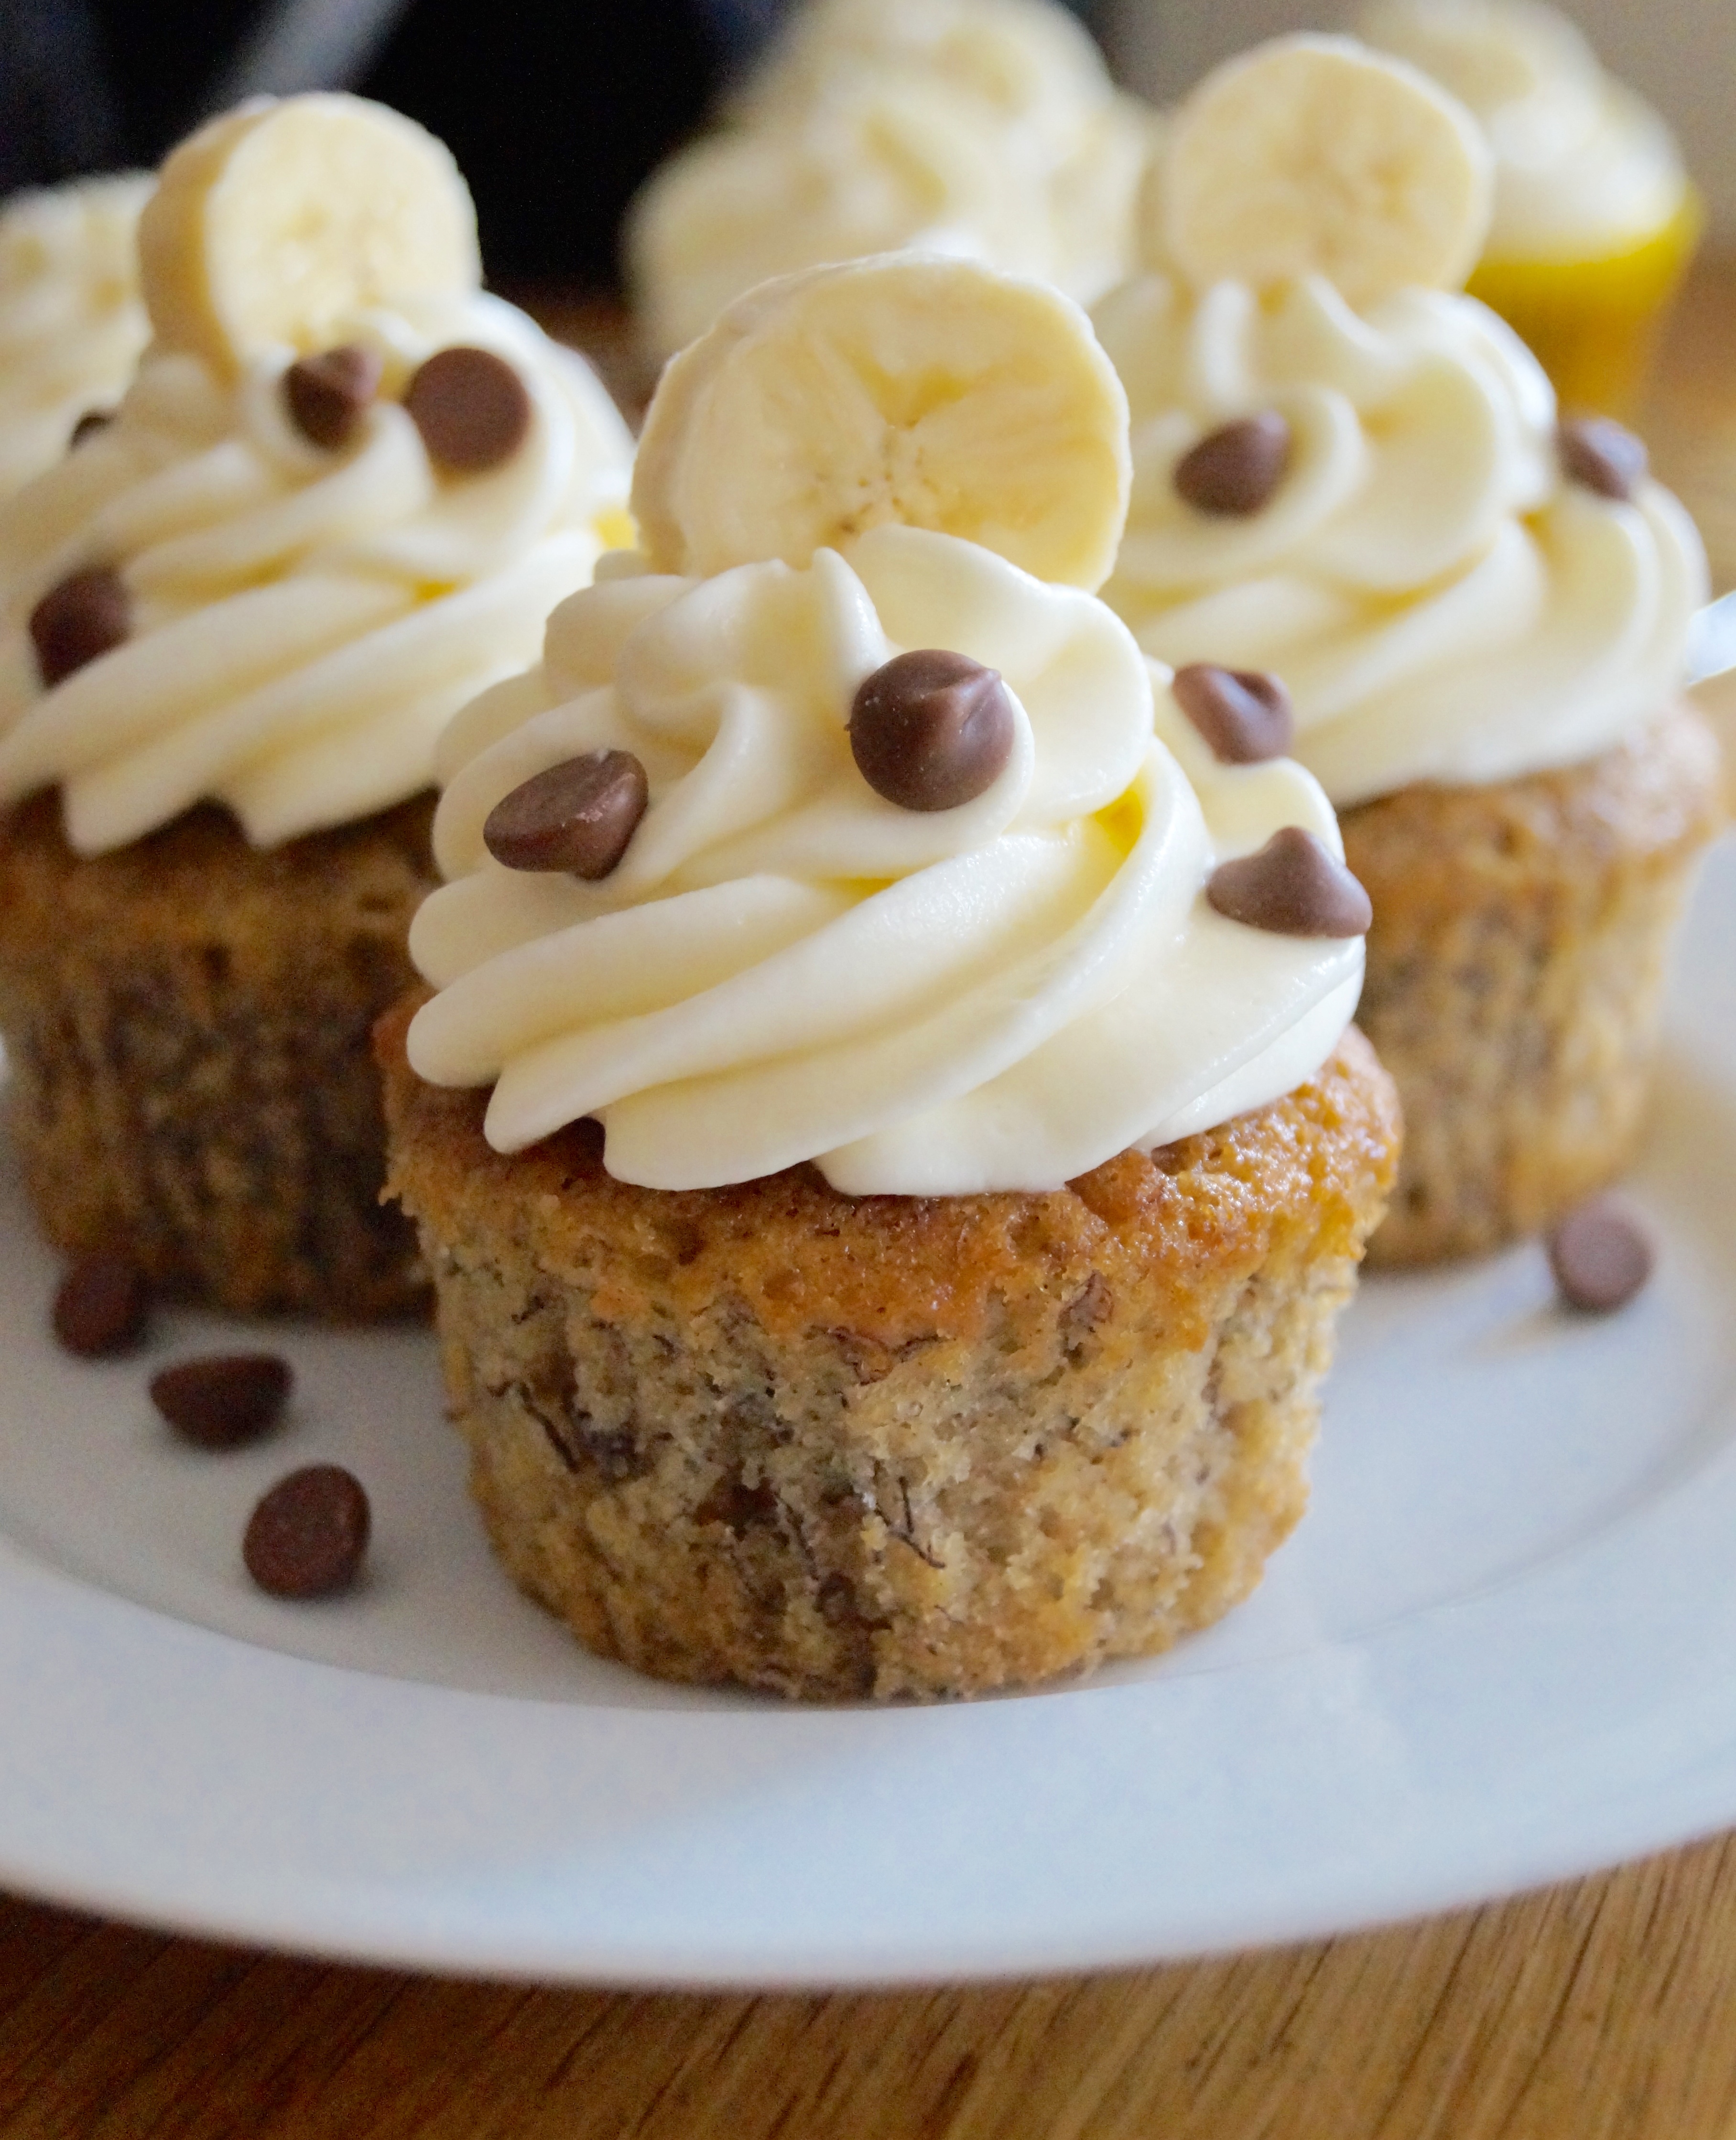 Banana Cupcakes with Cream Cheese Frosting | What Jessica Baked Next...